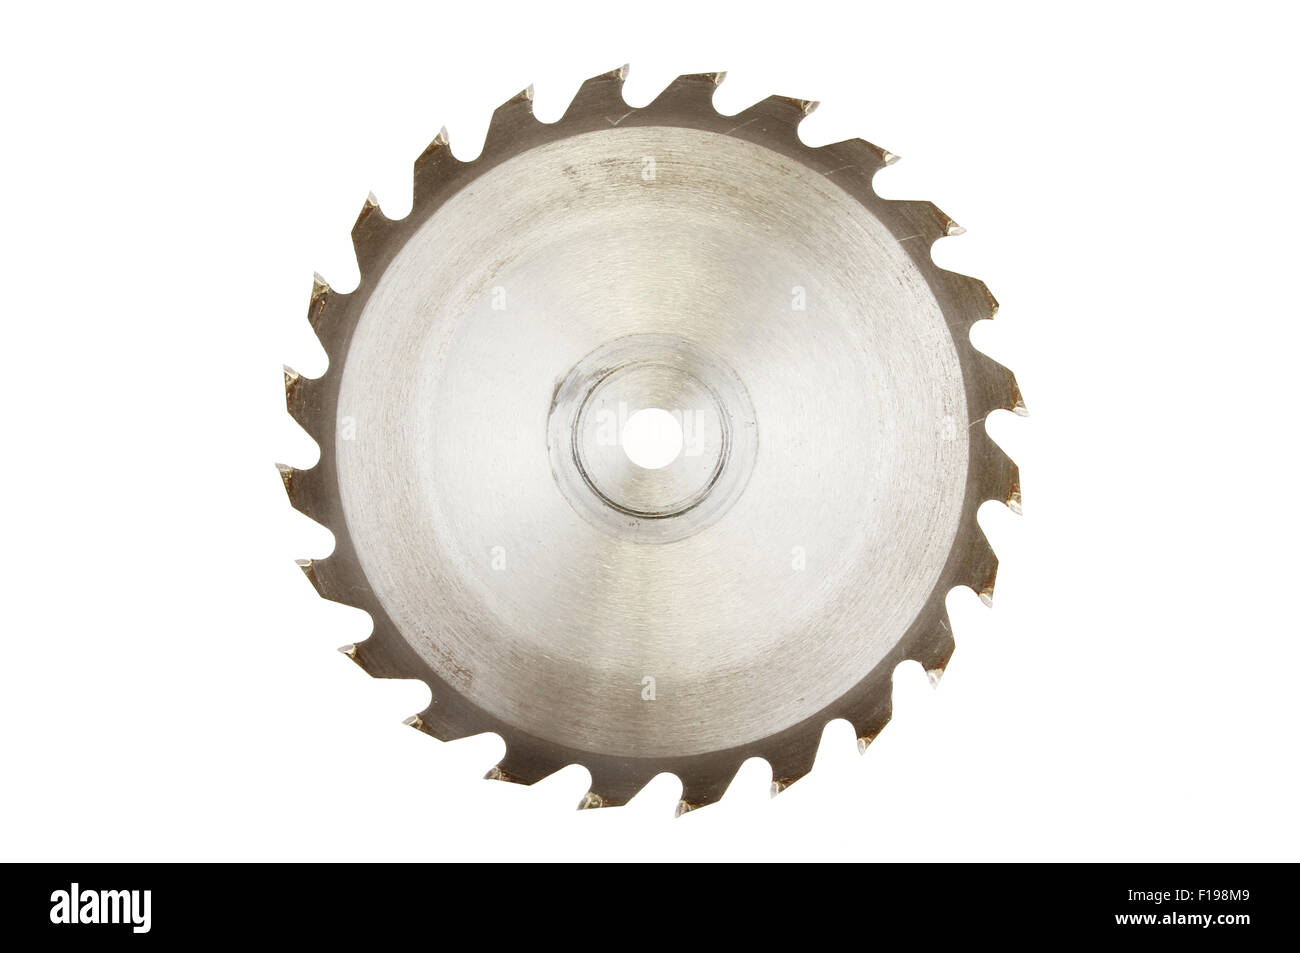 Used circular saw blade isolated against white Stock Photo